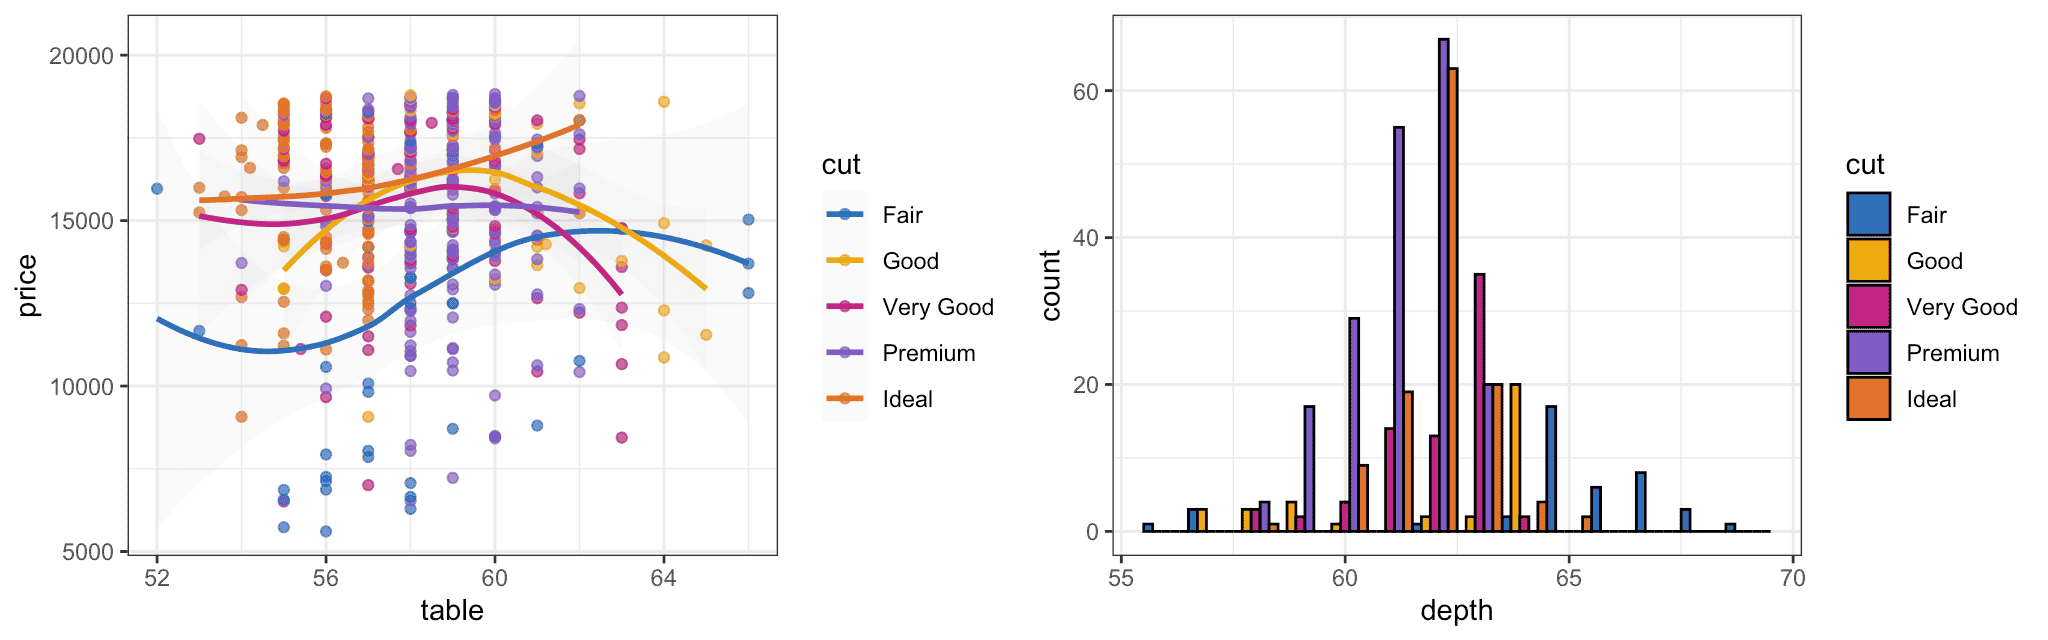 Color scales applied to ggplot2 plots.